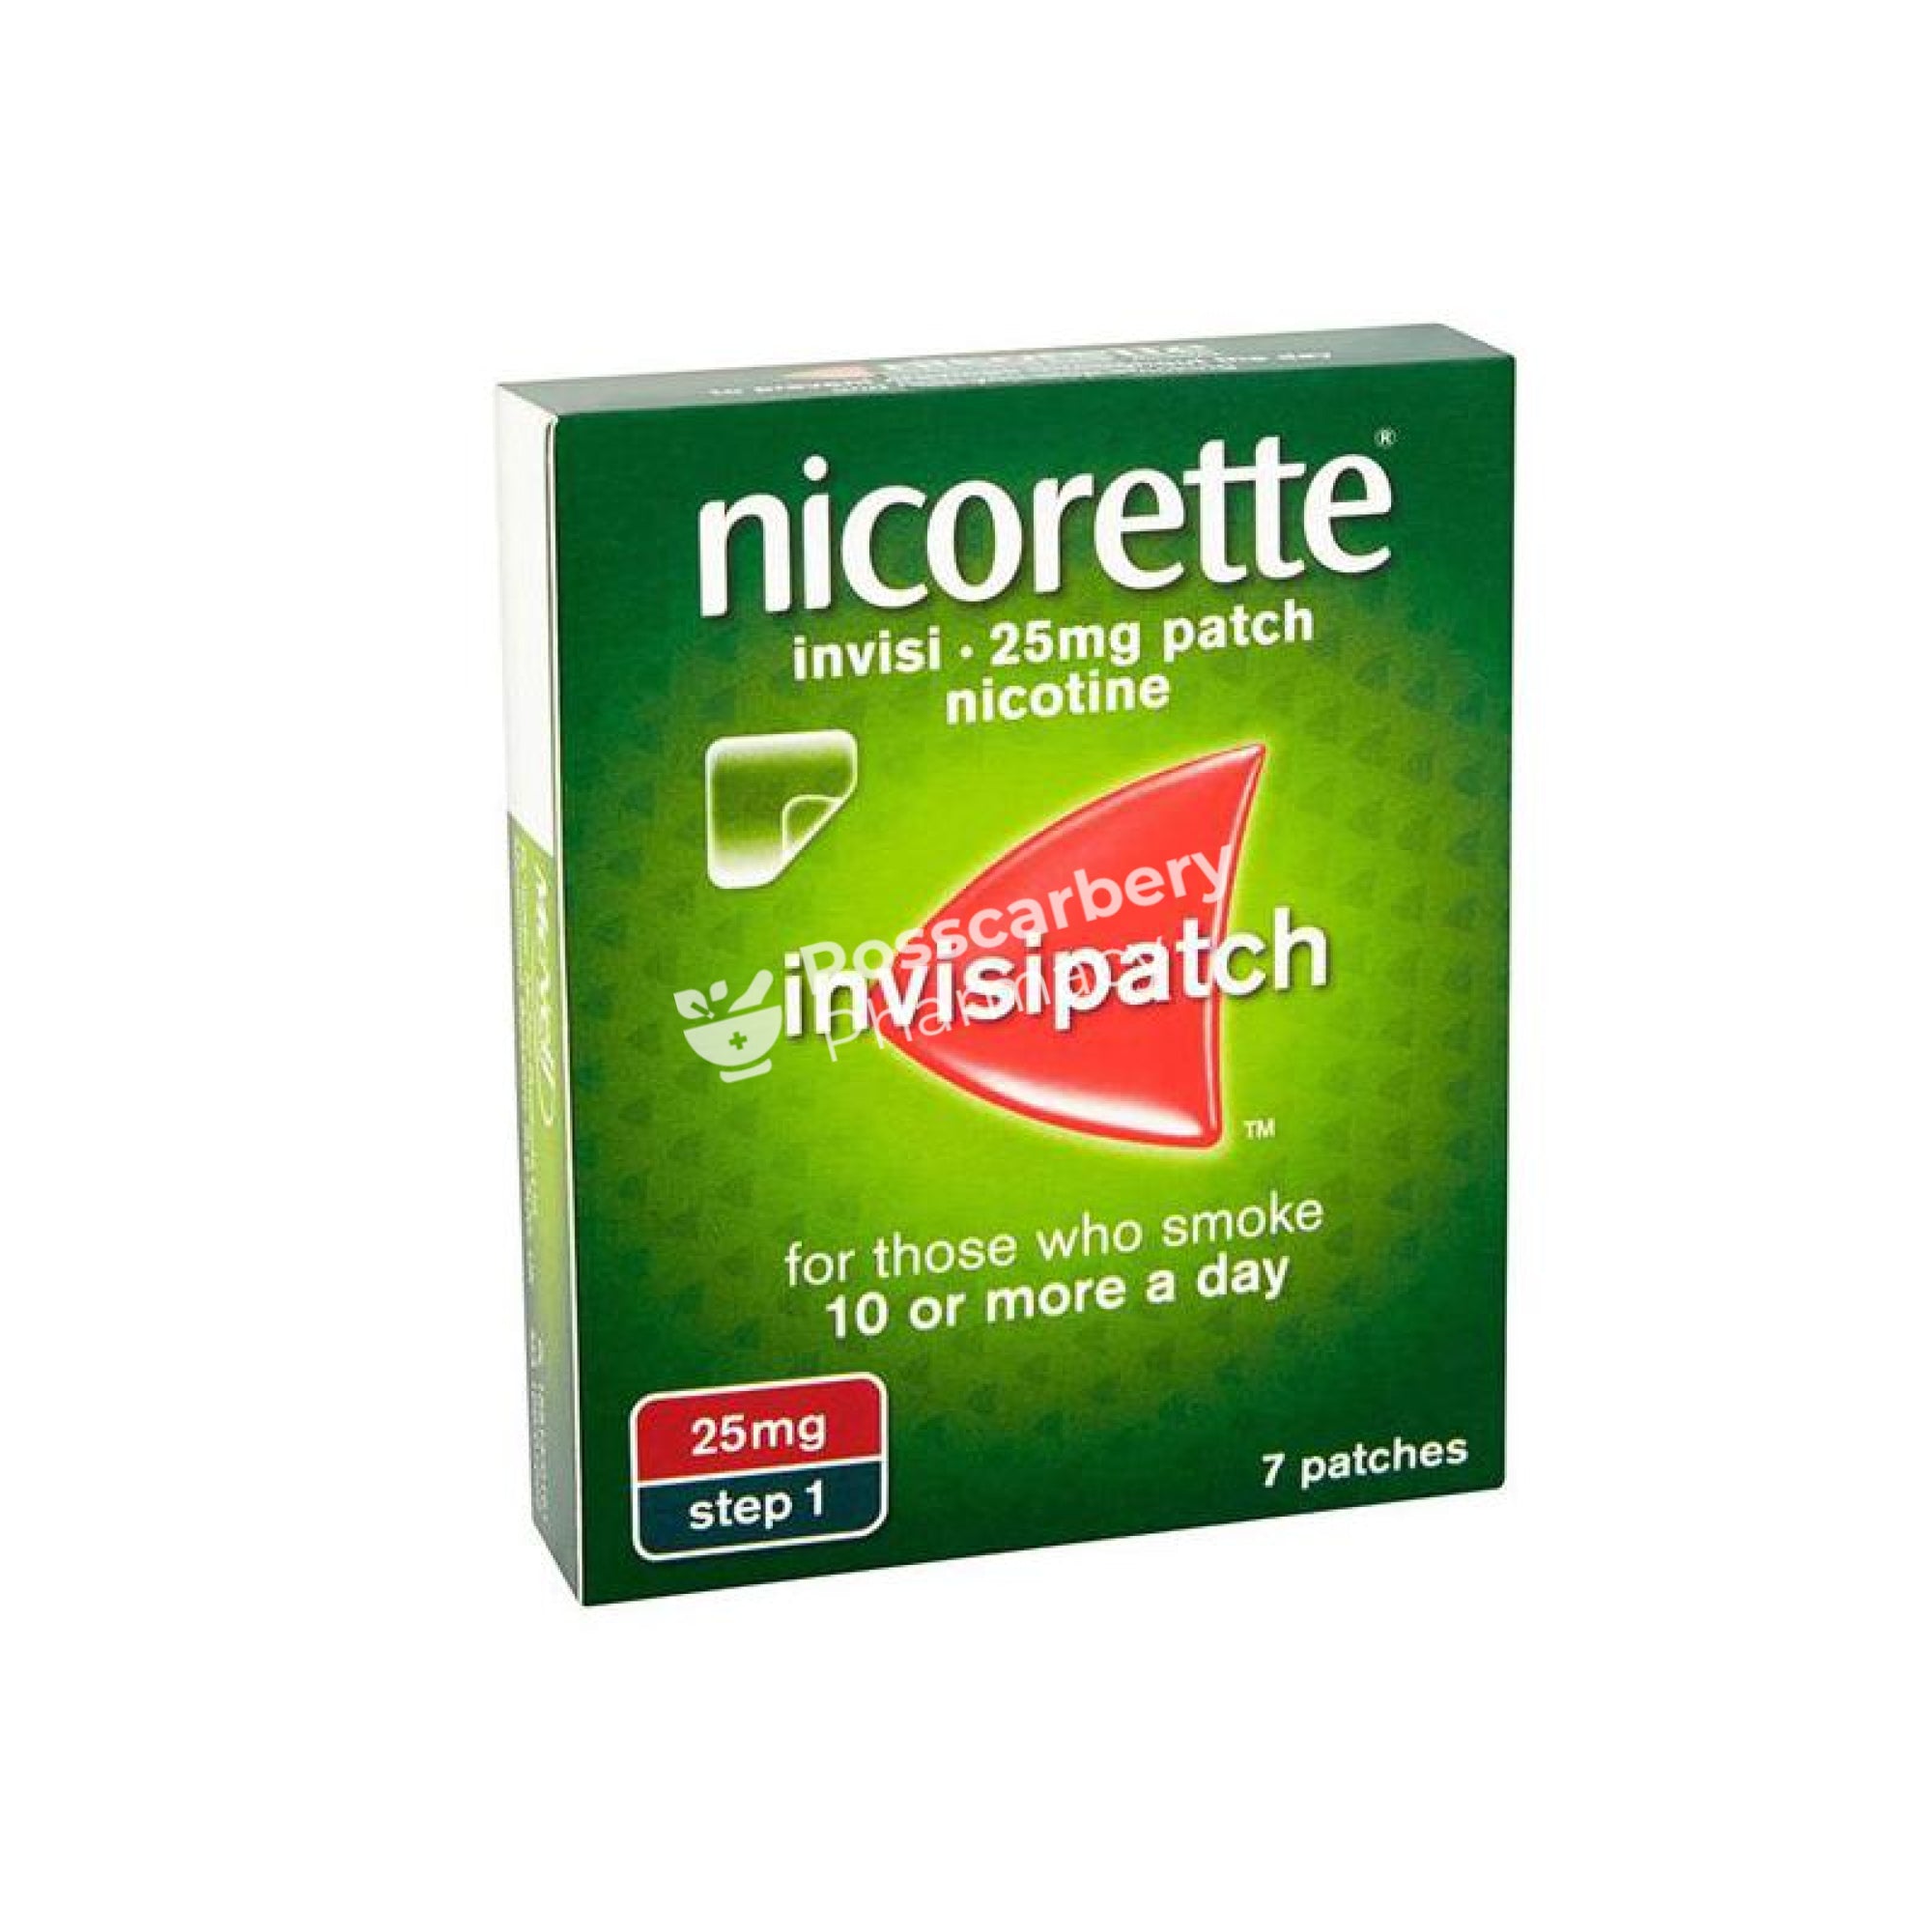 Nicorette Invisipatch Extra Strength 25Mg/16Hours Patches Step 1 Nicotine